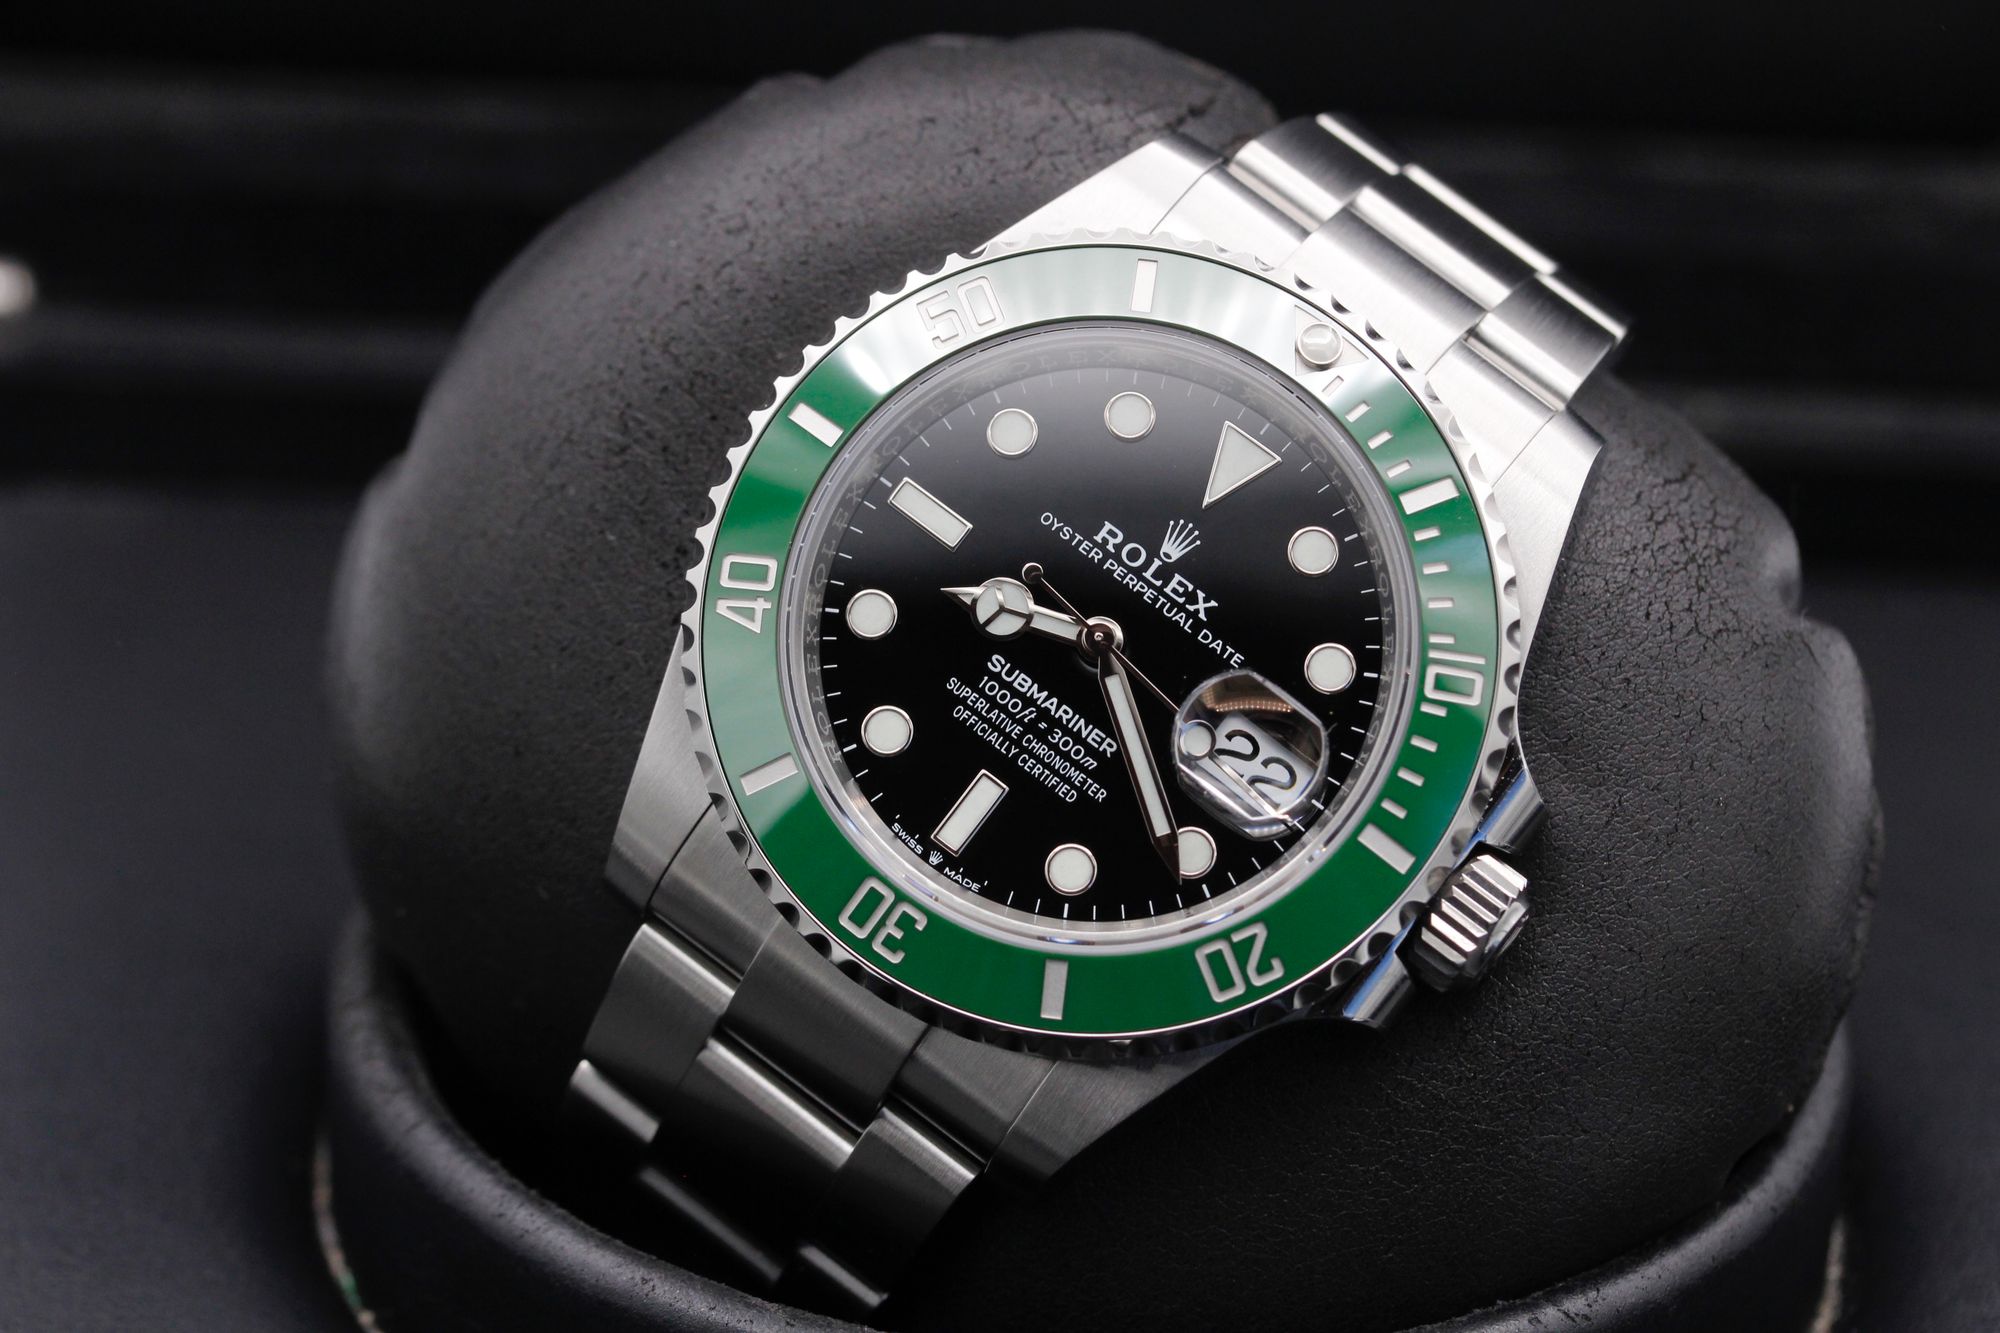 Rolex Submariner 126610LV MK2 Kermit Box and Papers 2023 NEW